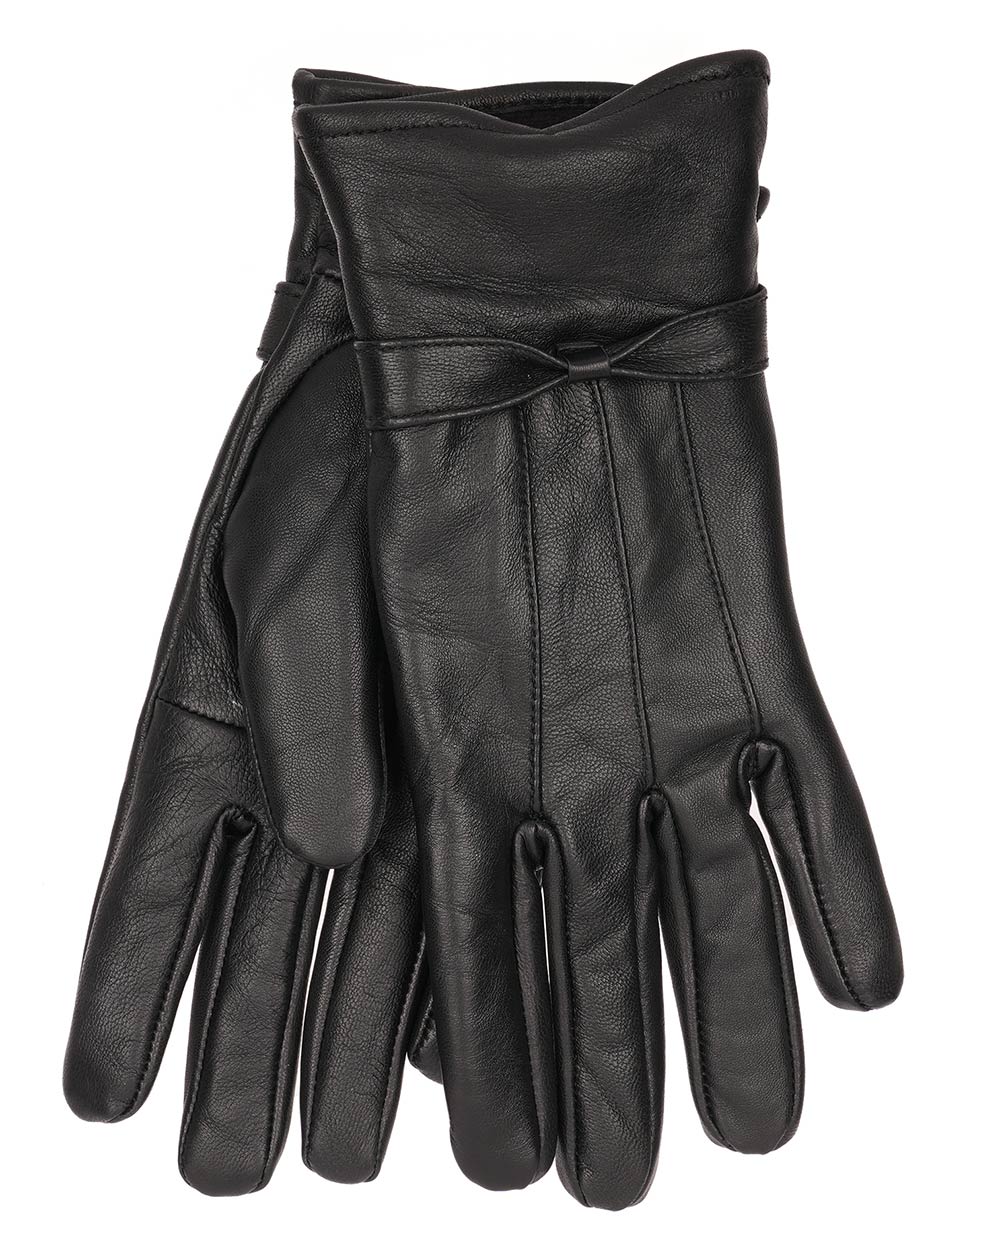 Ladies Leather Gloves Black With Bow Design